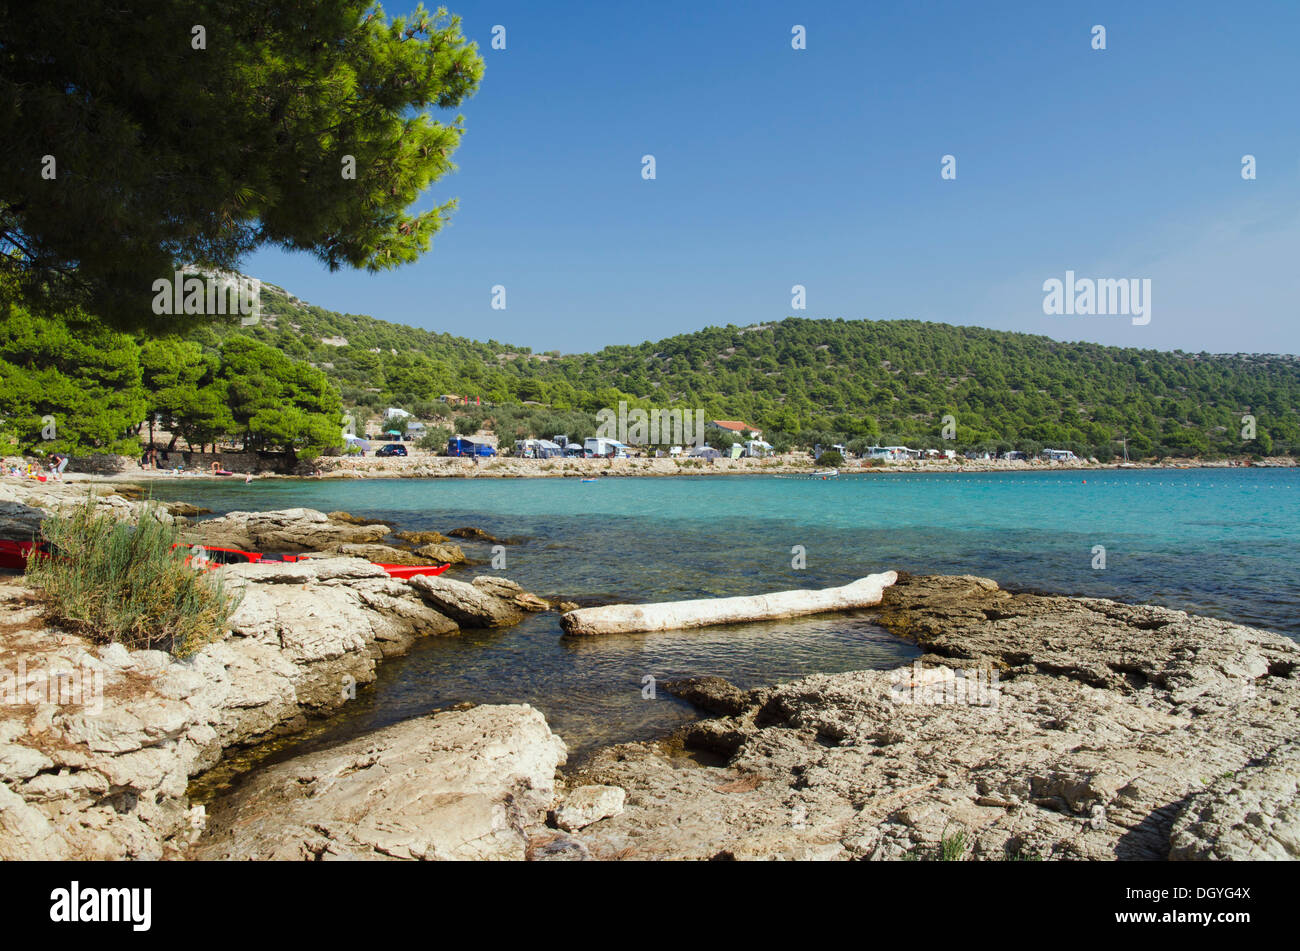 Tisno beach hi-res stock photography and images image image